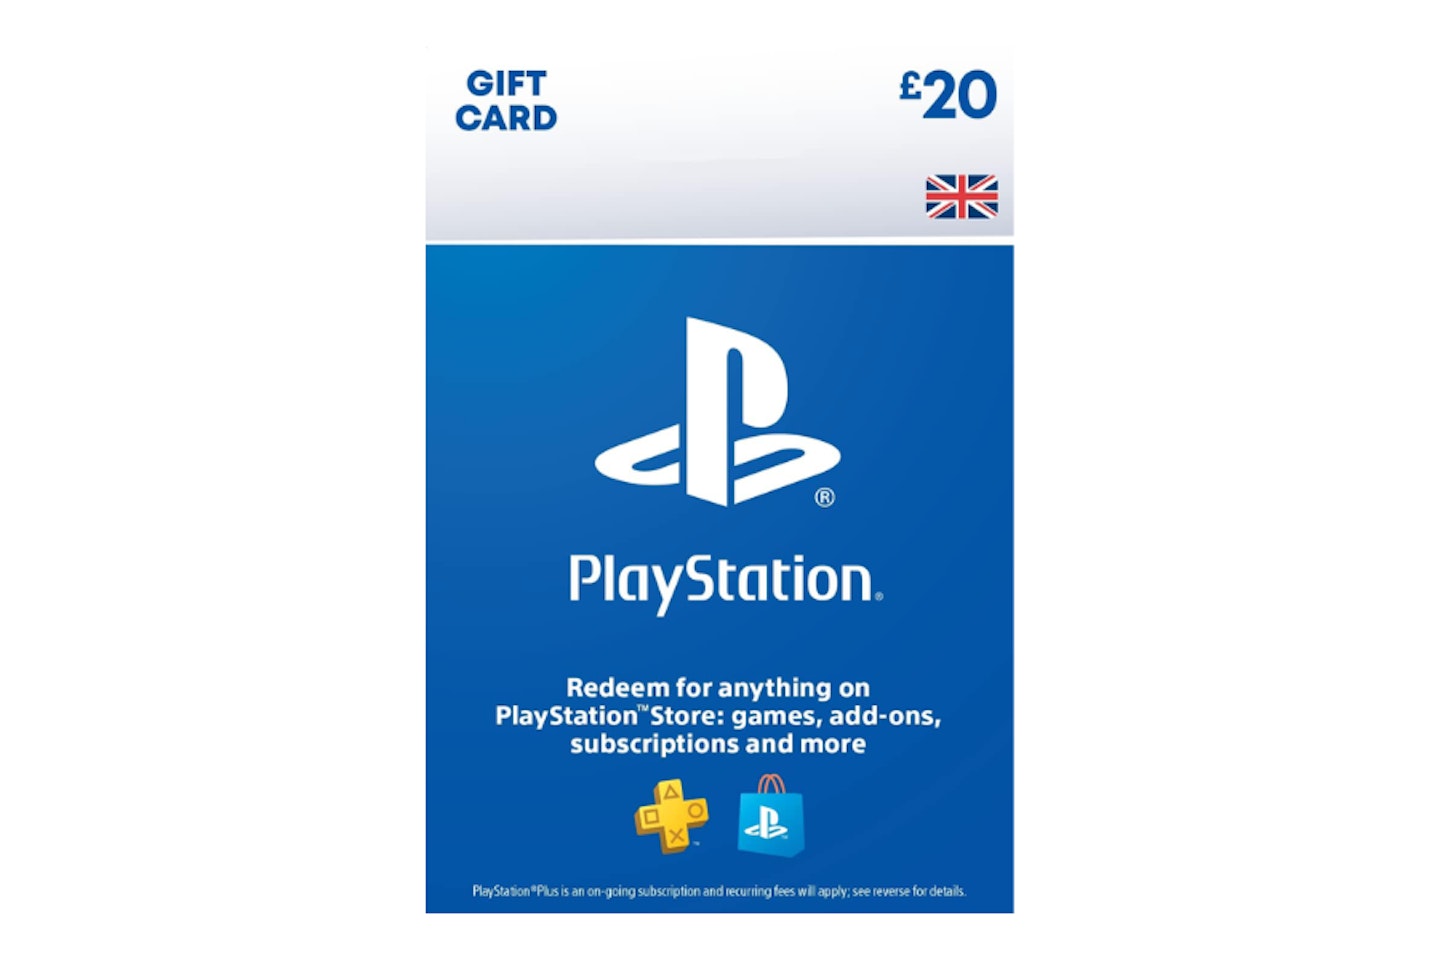 PlayStation Gift Cards  - one of the best gifts for gamers